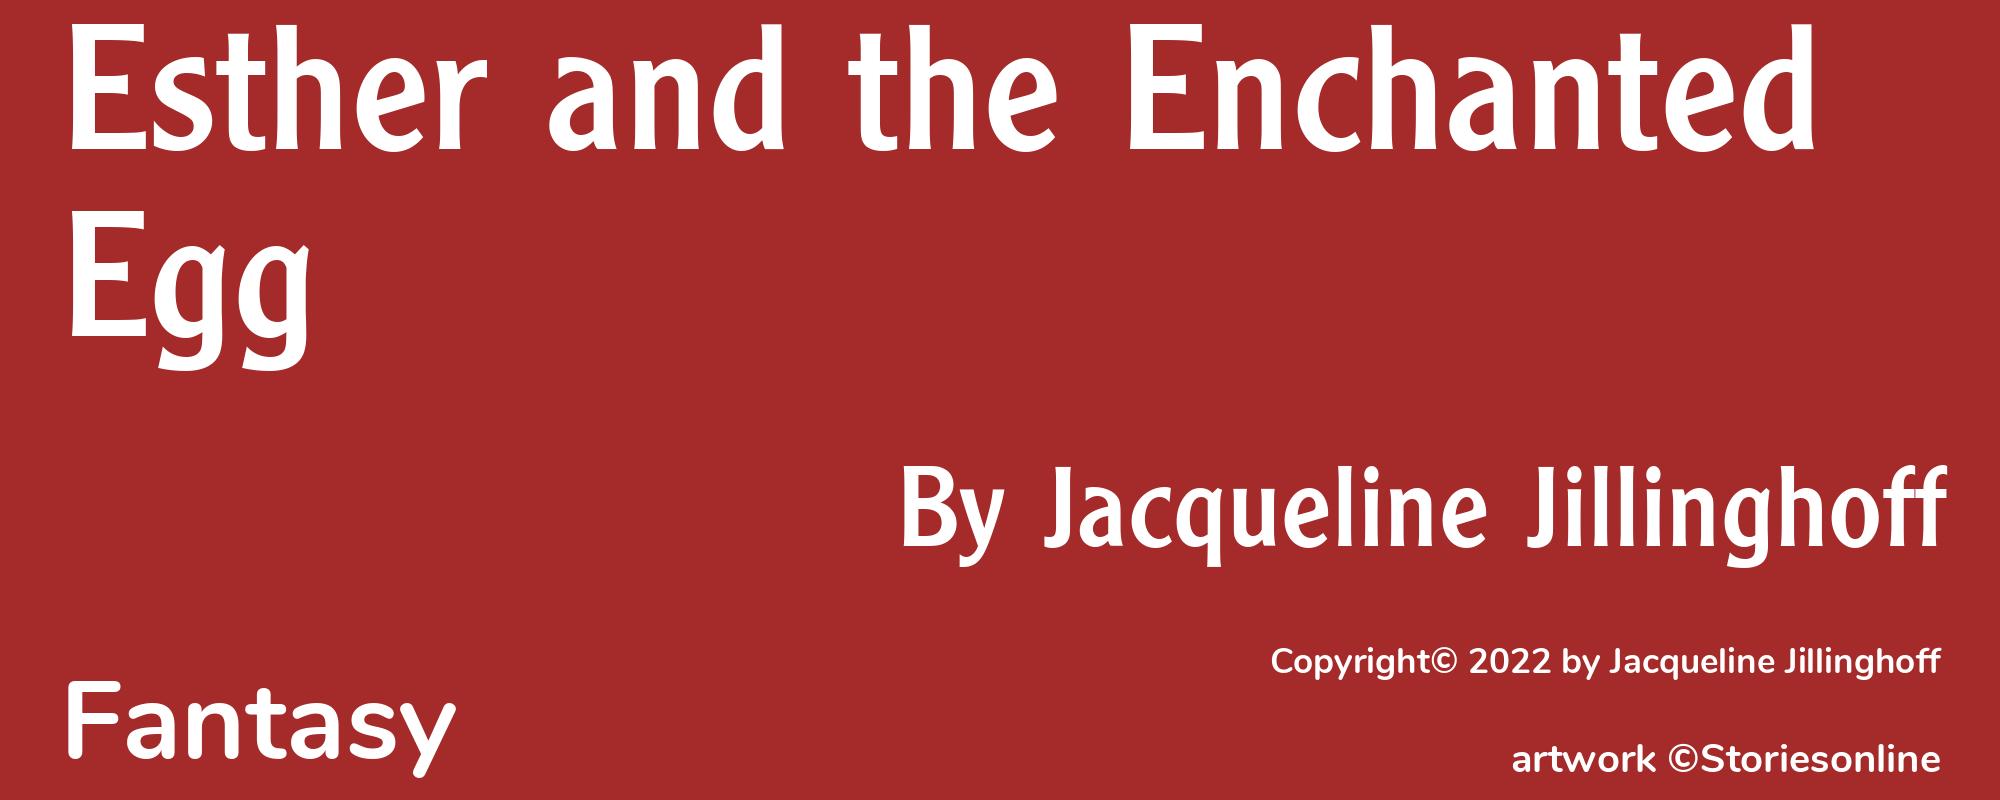 Esther and the Enchanted Egg - Cover